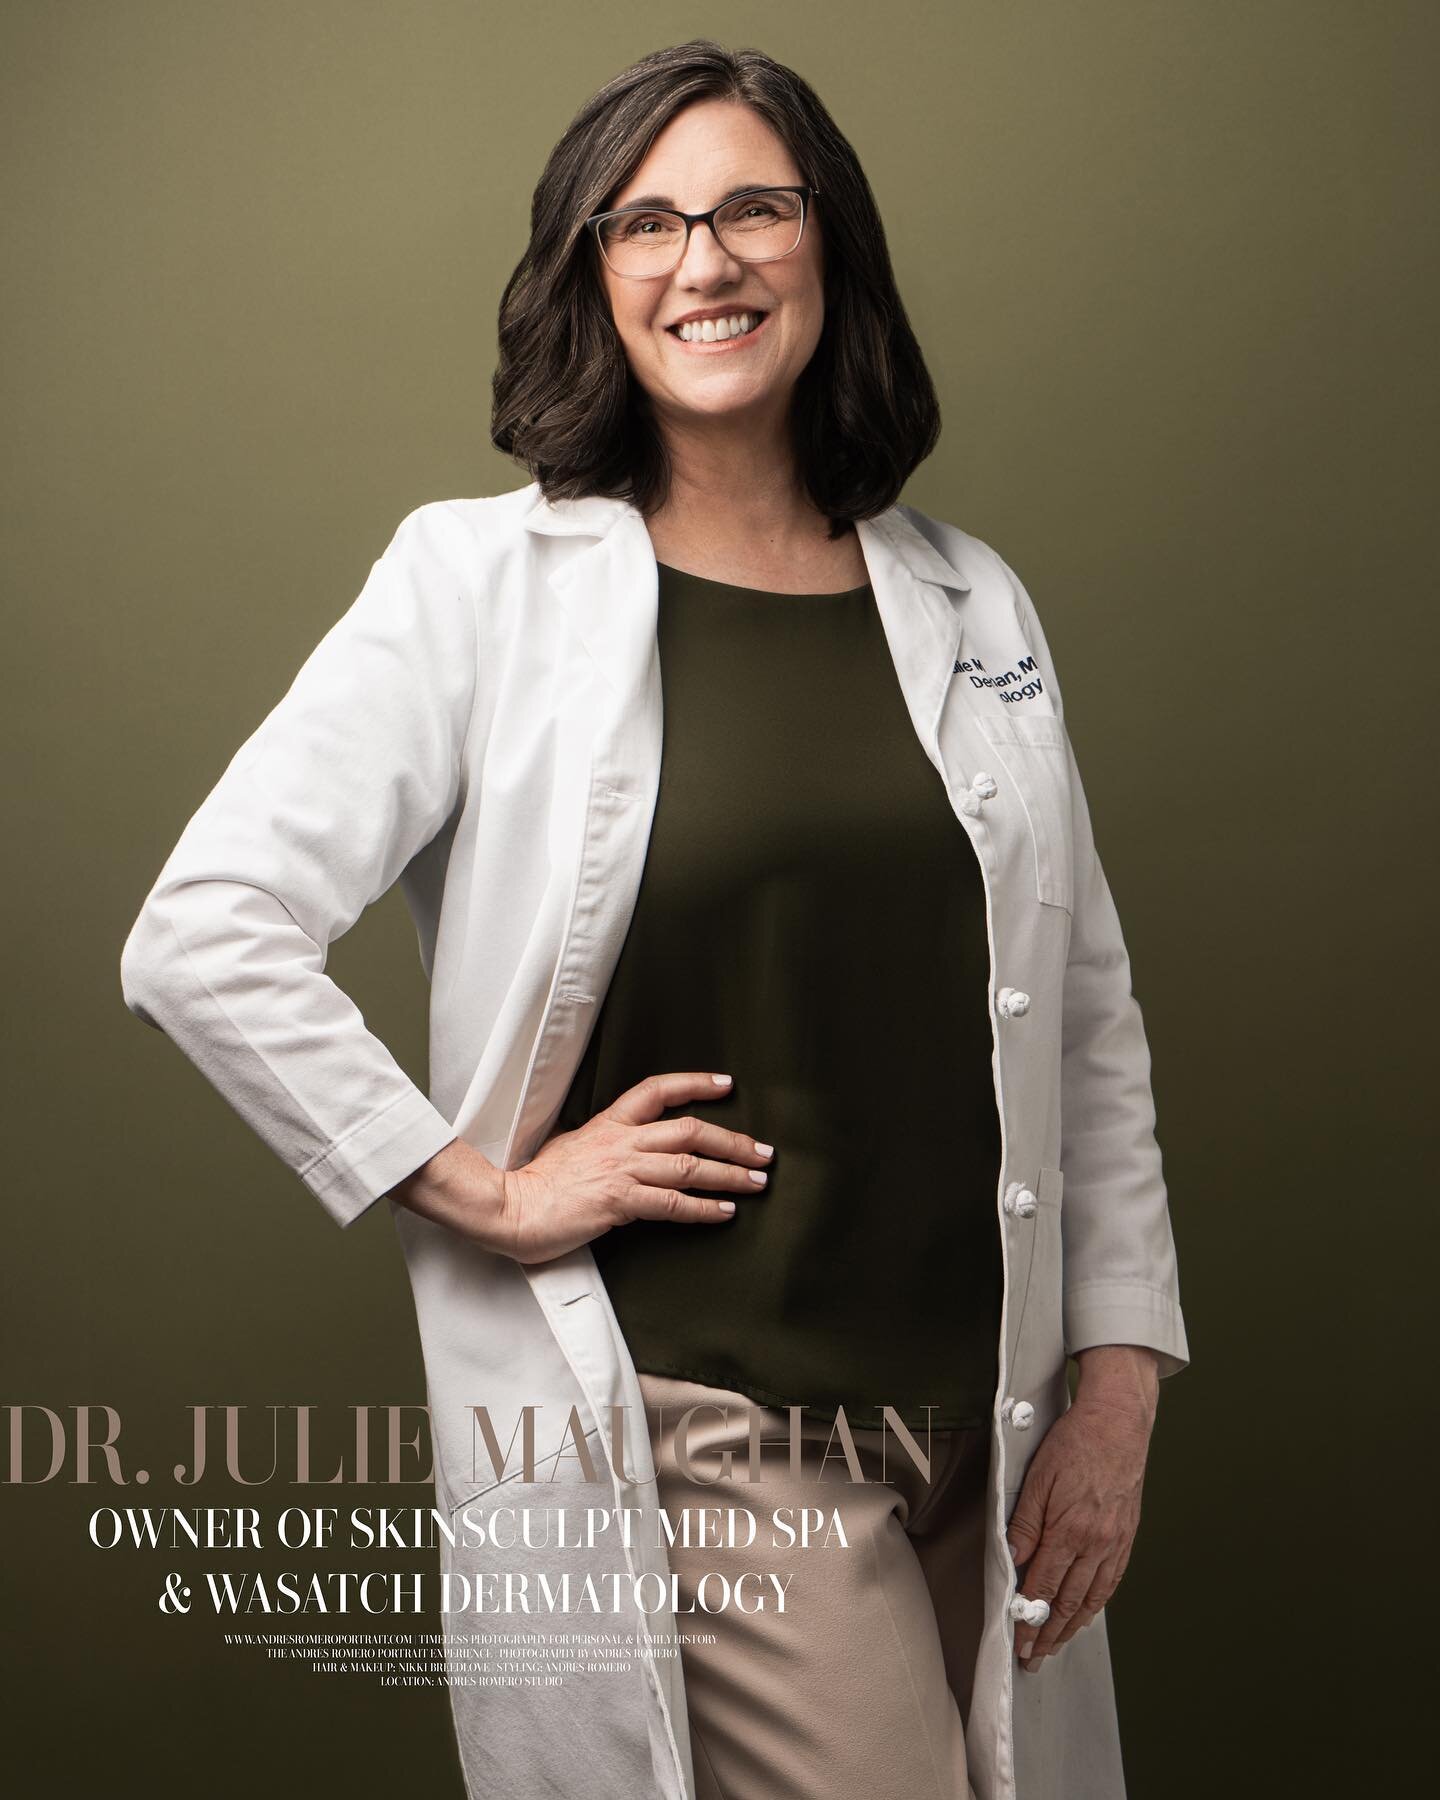 When I talk to entrepreneurs, I always love to remind them of the importance of getting their message, service, or product into the world boldly. Dr. Julie Maughan has a medical spa in Utah that seeks to challenge the status quo of how procedures loo